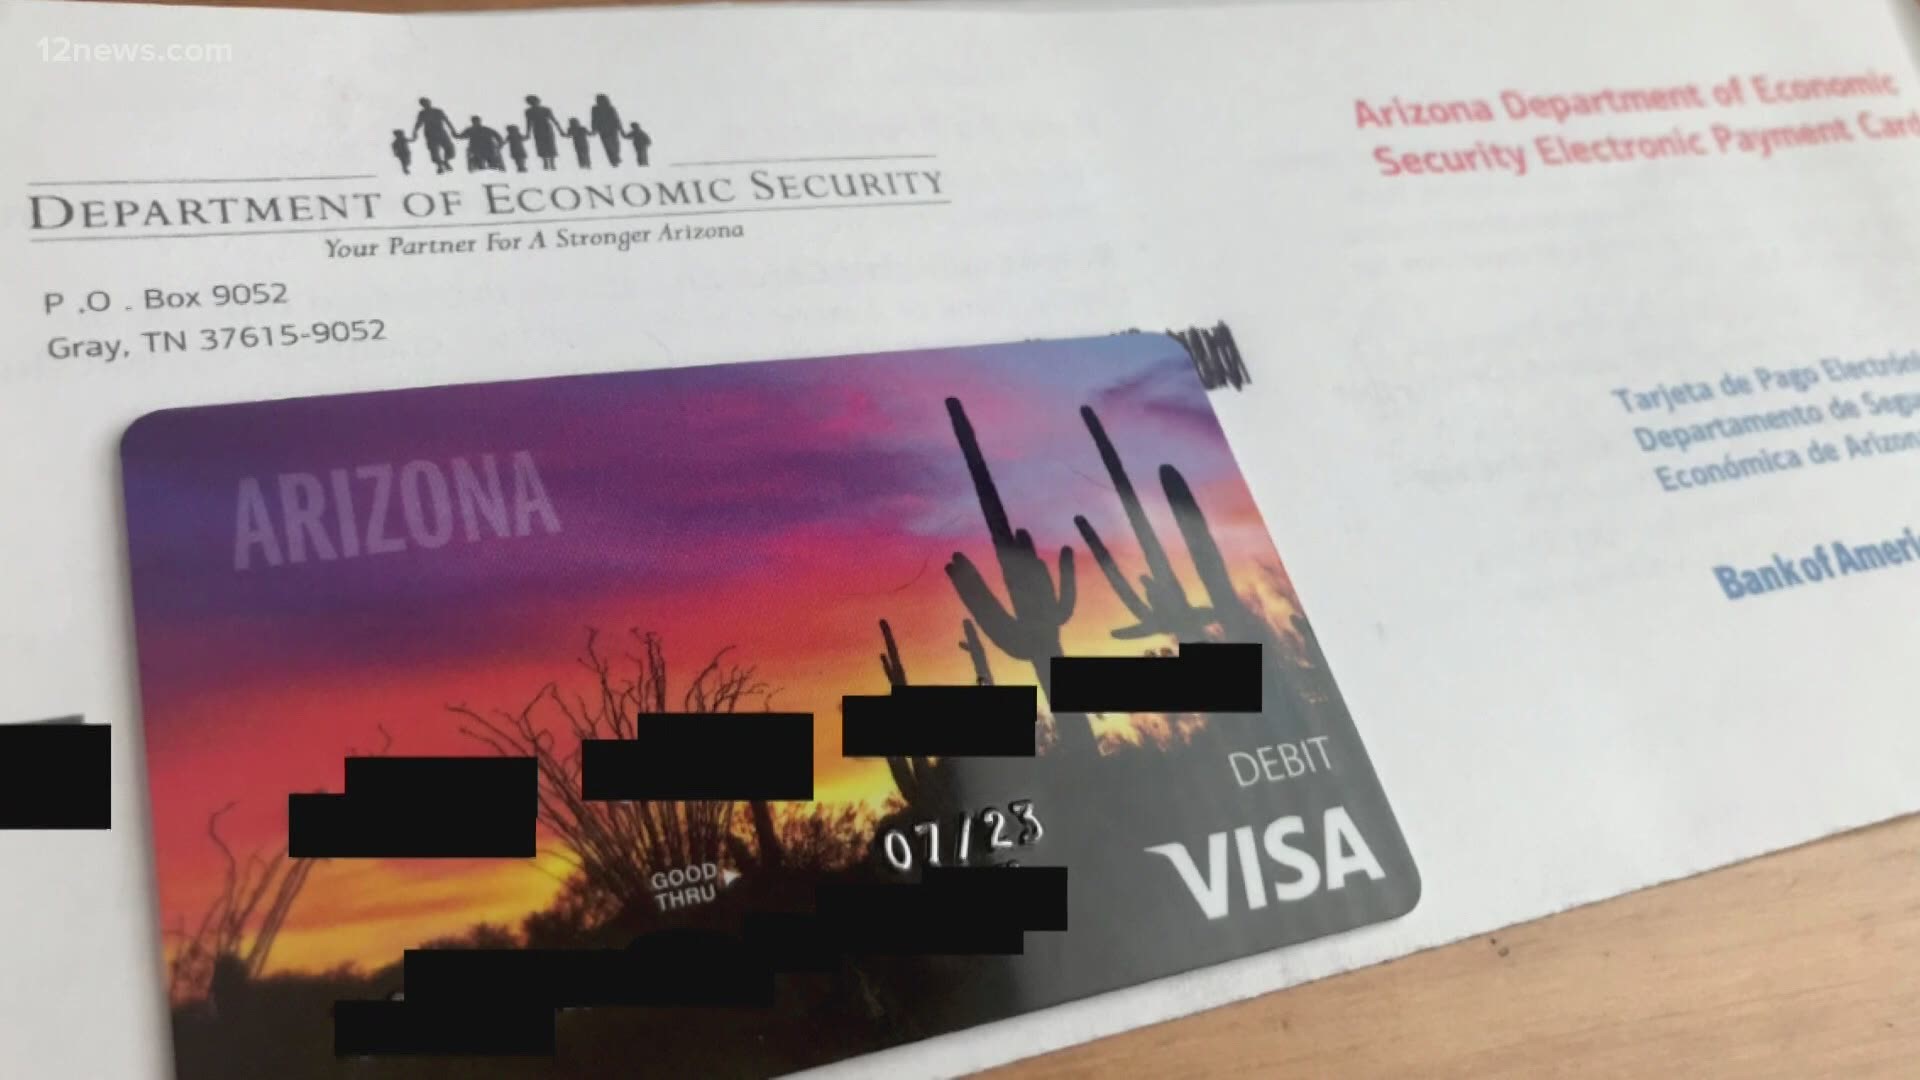 Dozens of people tell 12 News they worked in Arizona and received unemployment benefits when COVID-19 hit. Now they're finding their accounts are completely empty.